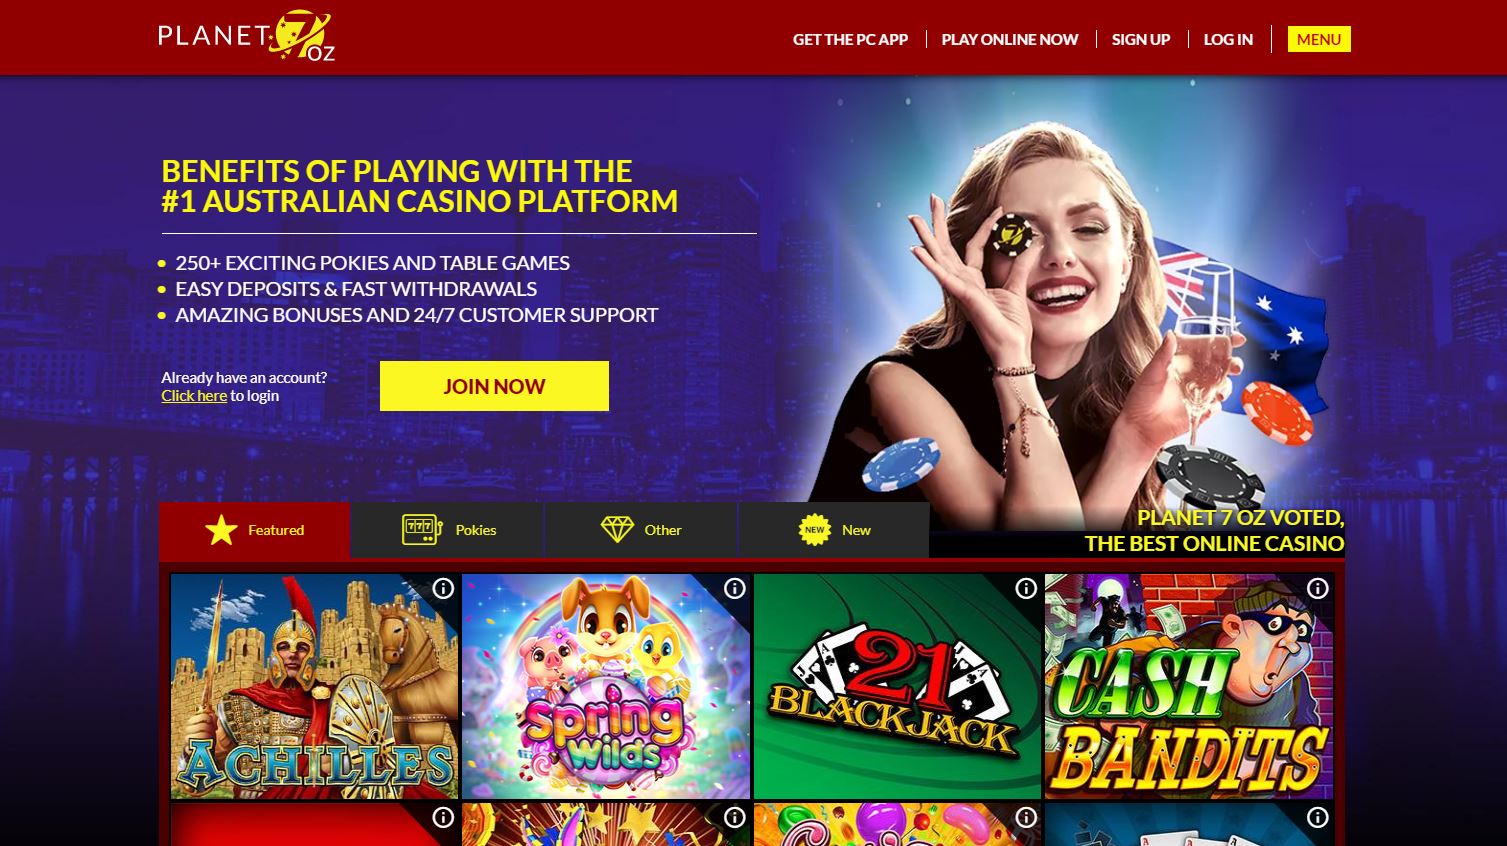 The Top 5 Slot Machines to Try at Planet 7 Casino